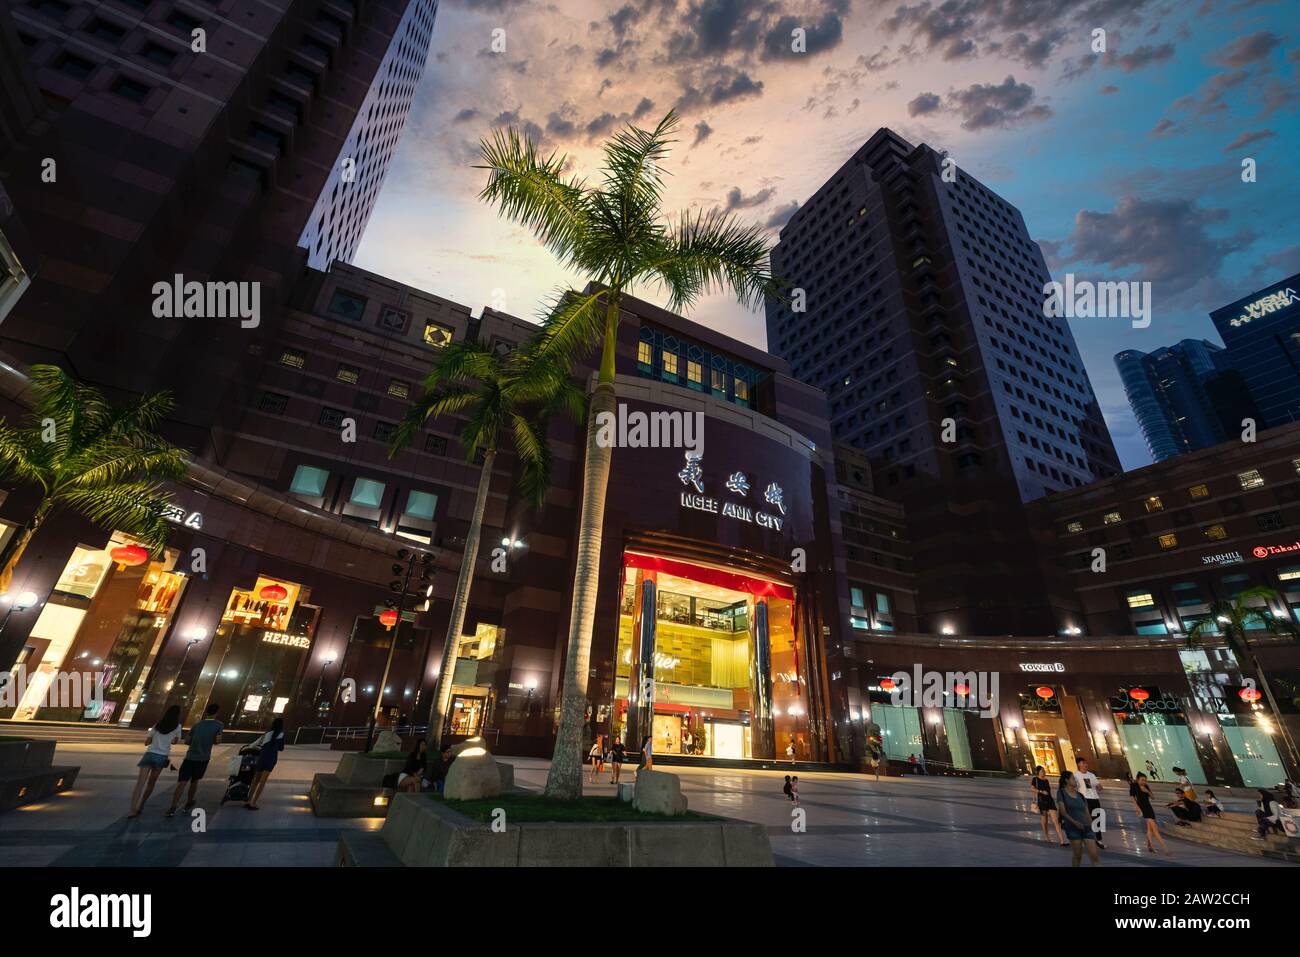 Ngee ann city hi-res stock photography and images - Alamy